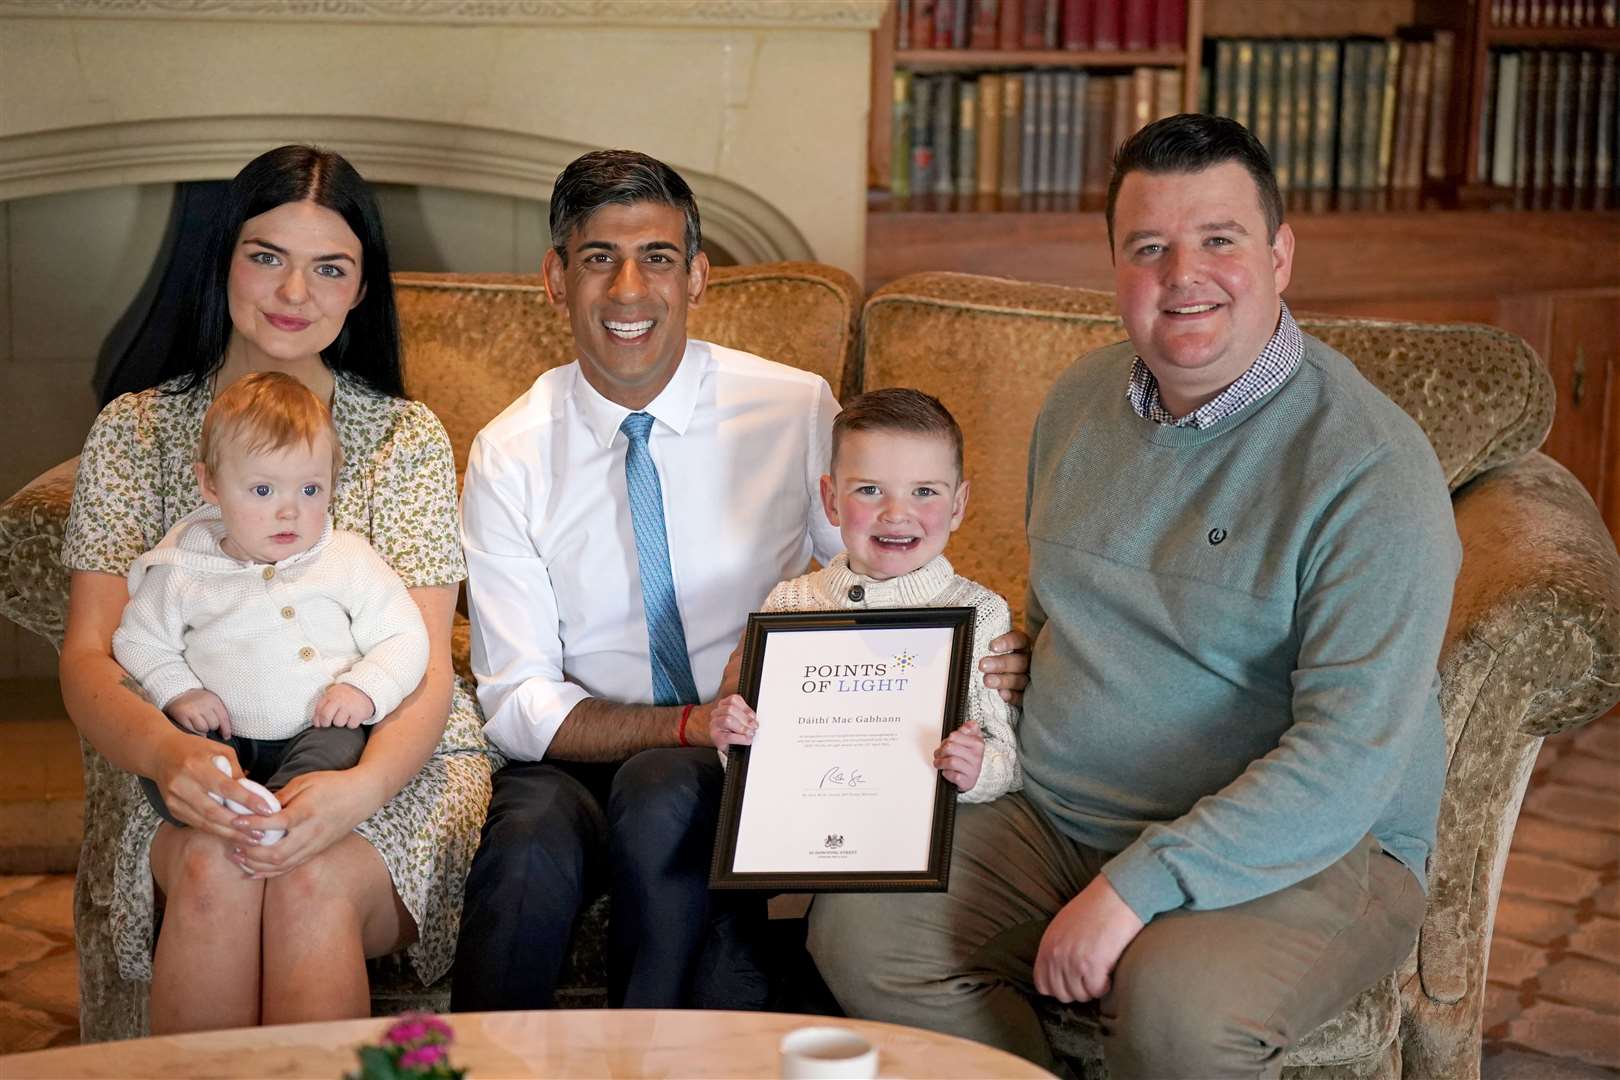 Daithi Mac Gabhann with his father Mairtin Mac Gabhann, mother Seph Ni Mheallain and younger brother Cairbre as he is presented with an award by Rishi Sunak (Niall Carson/PA)